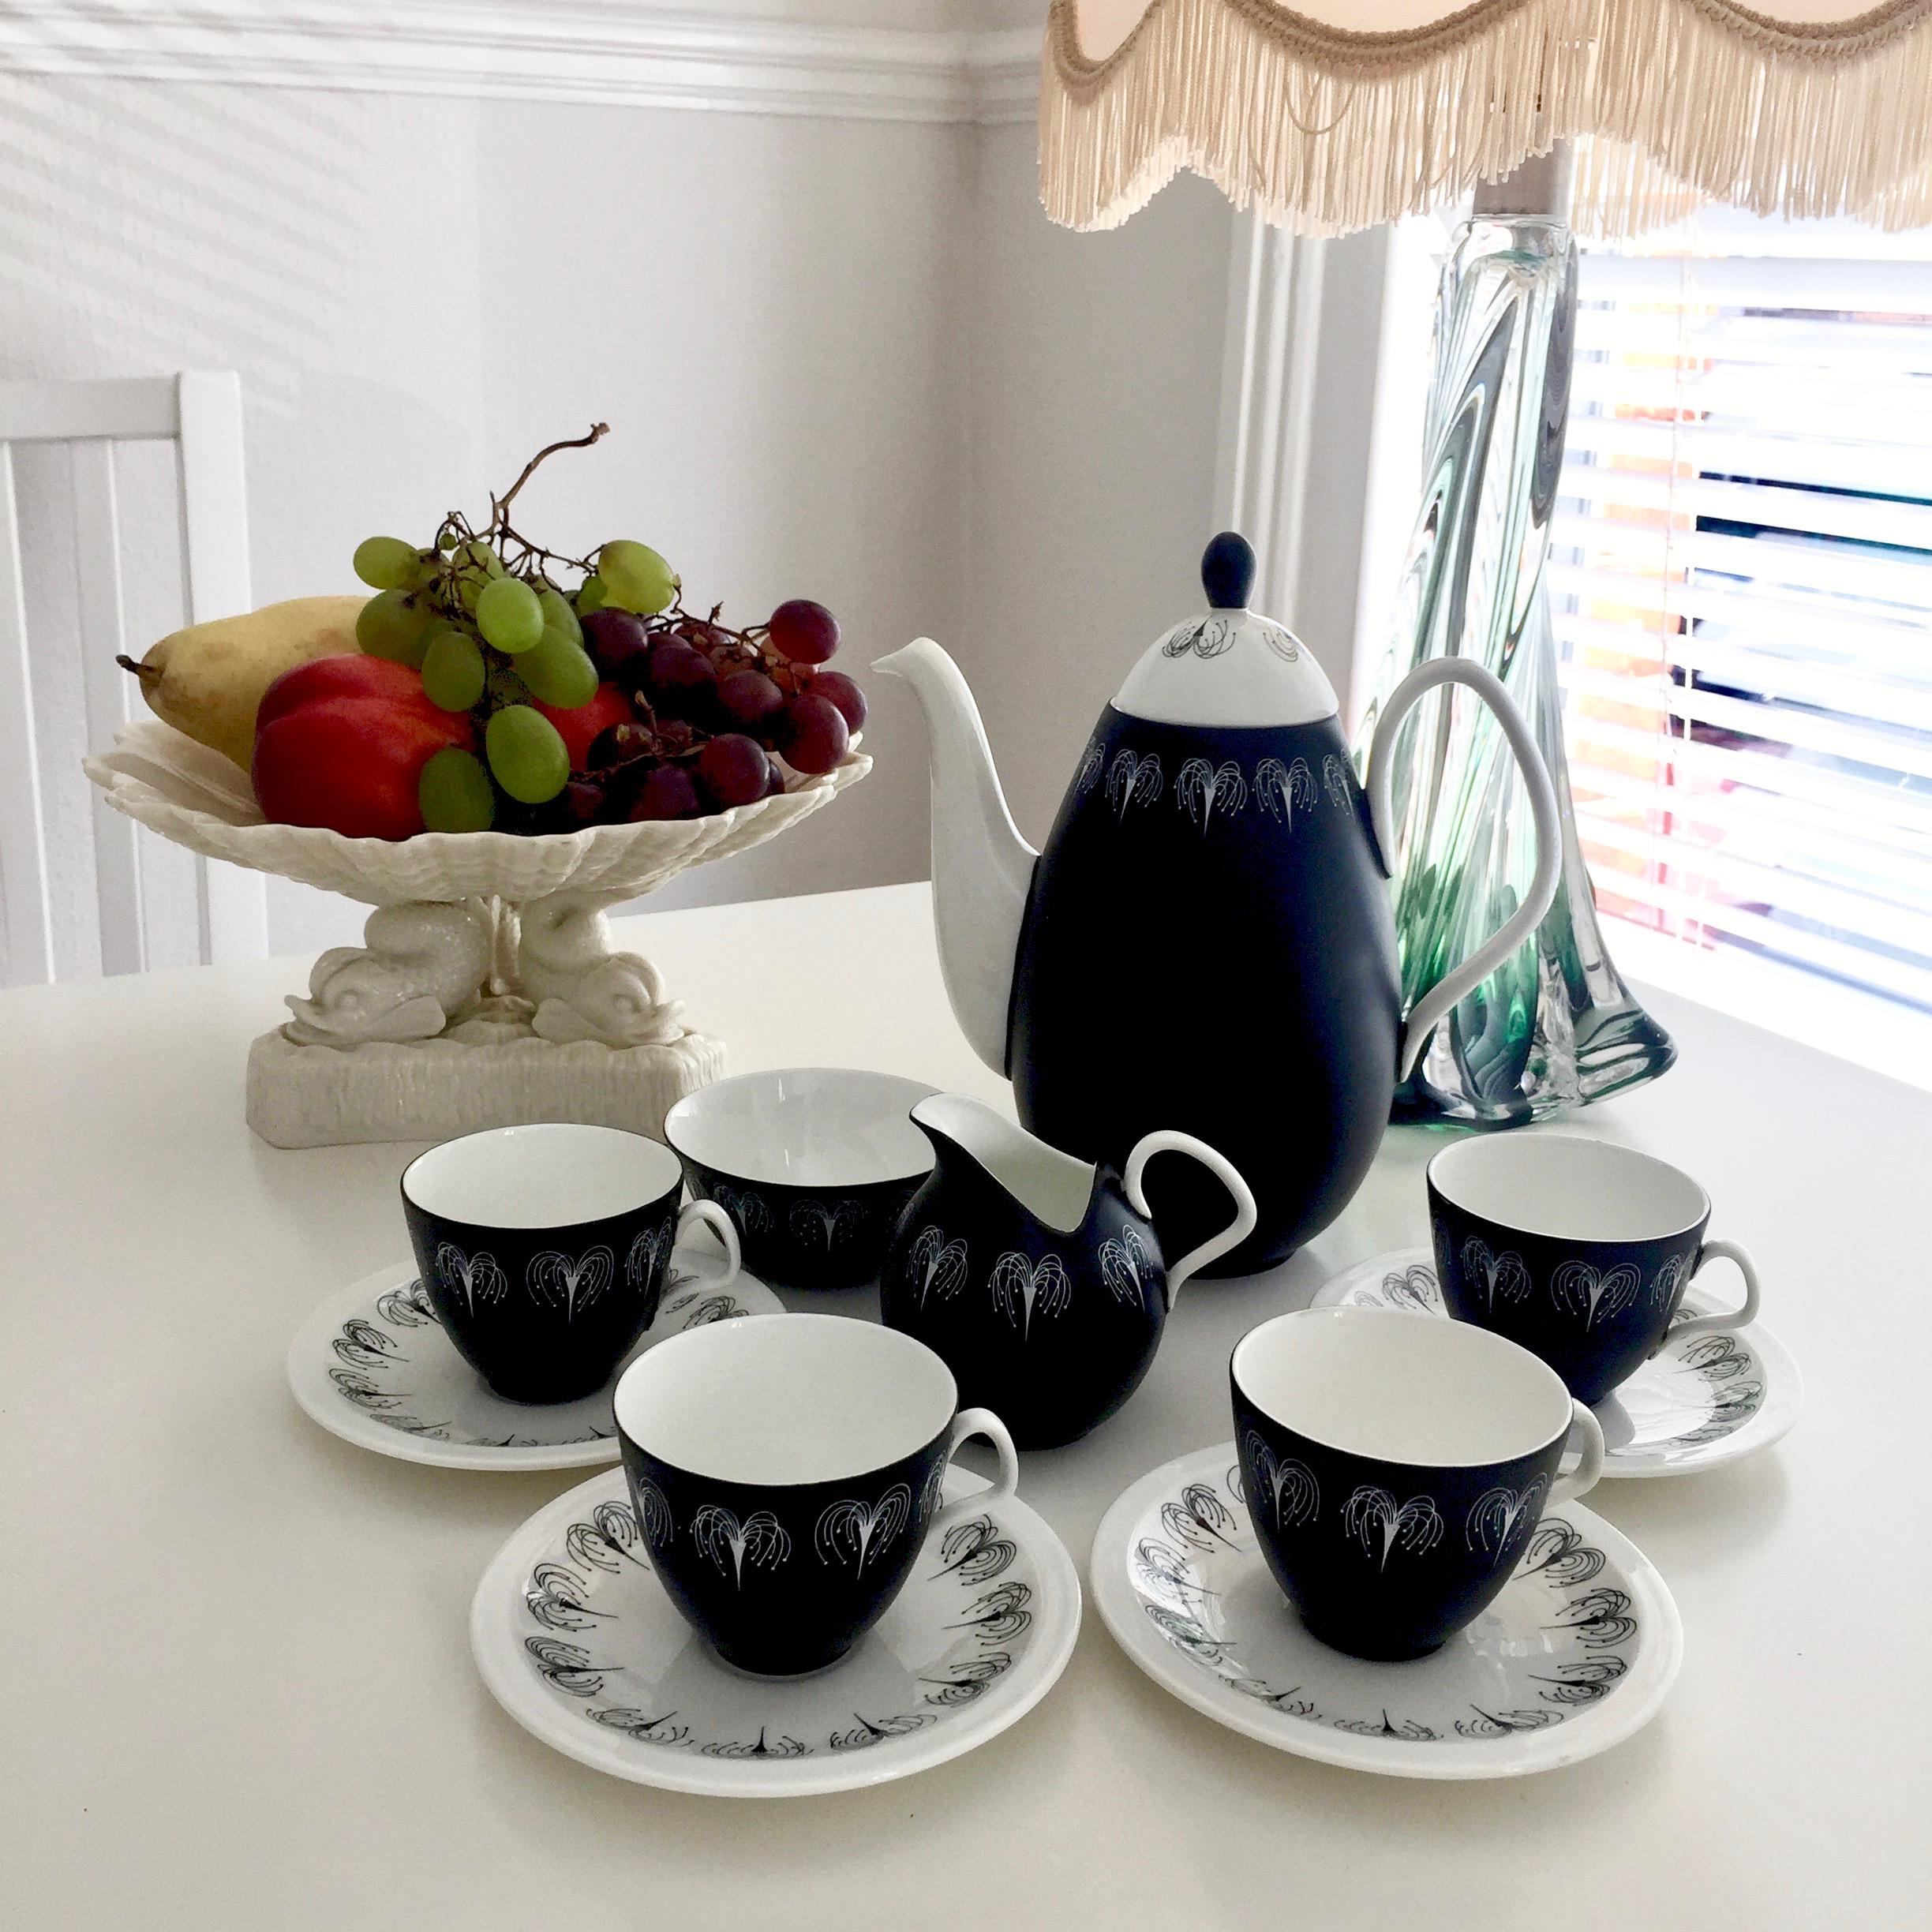 This is a stunning Midcentury Modern coffee service serving four, made by E. Brain, also called Foley, in 1957. The shape of this service was designed by Donald Brindly and the black and white decoration called 